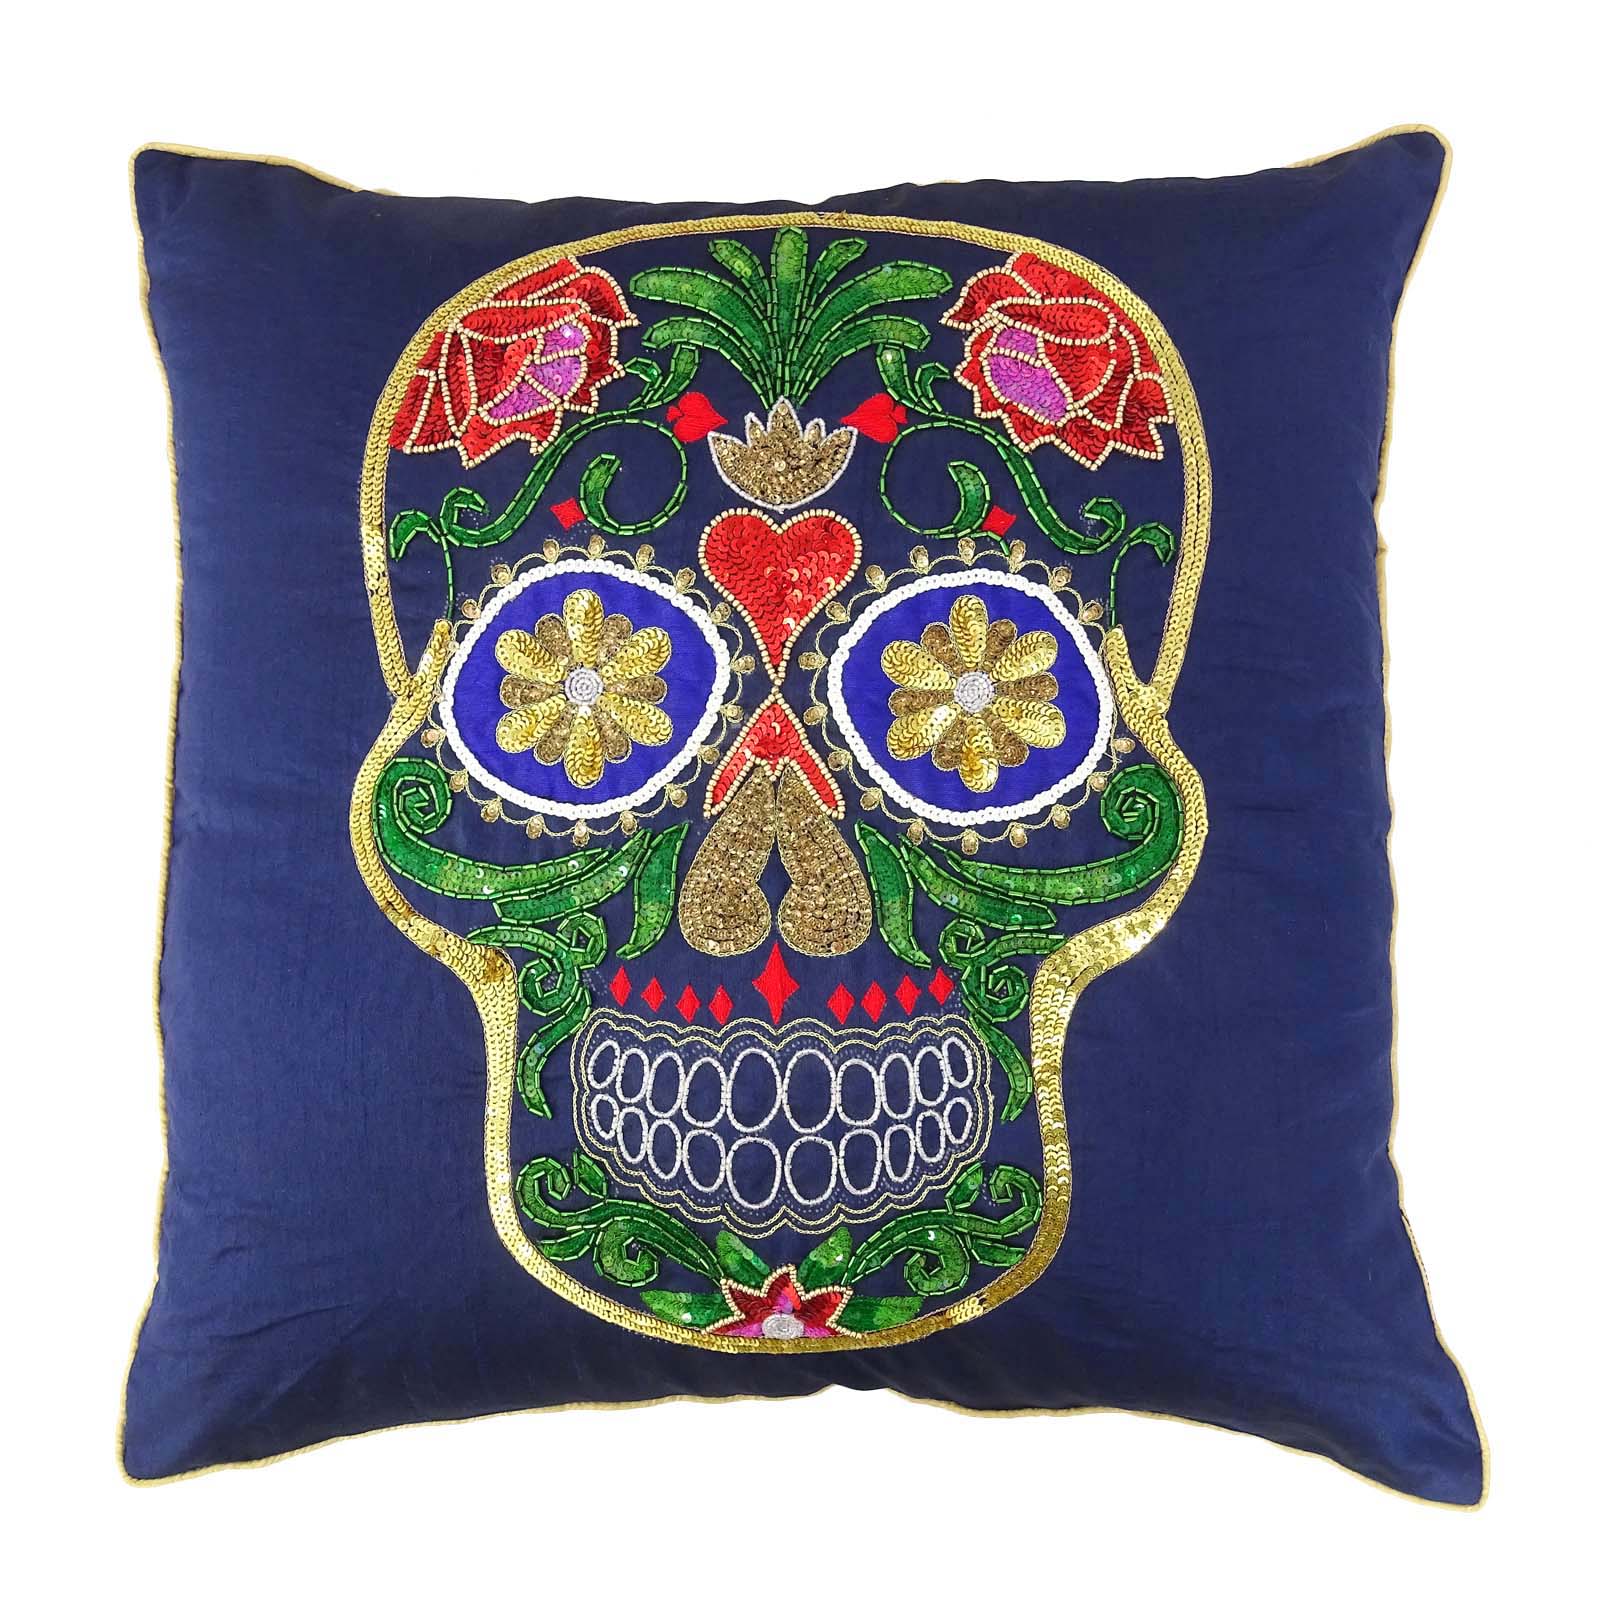 Skull Cushion Cover Soft Satin Fabric Black & Off White Square Throw Pillow Case 